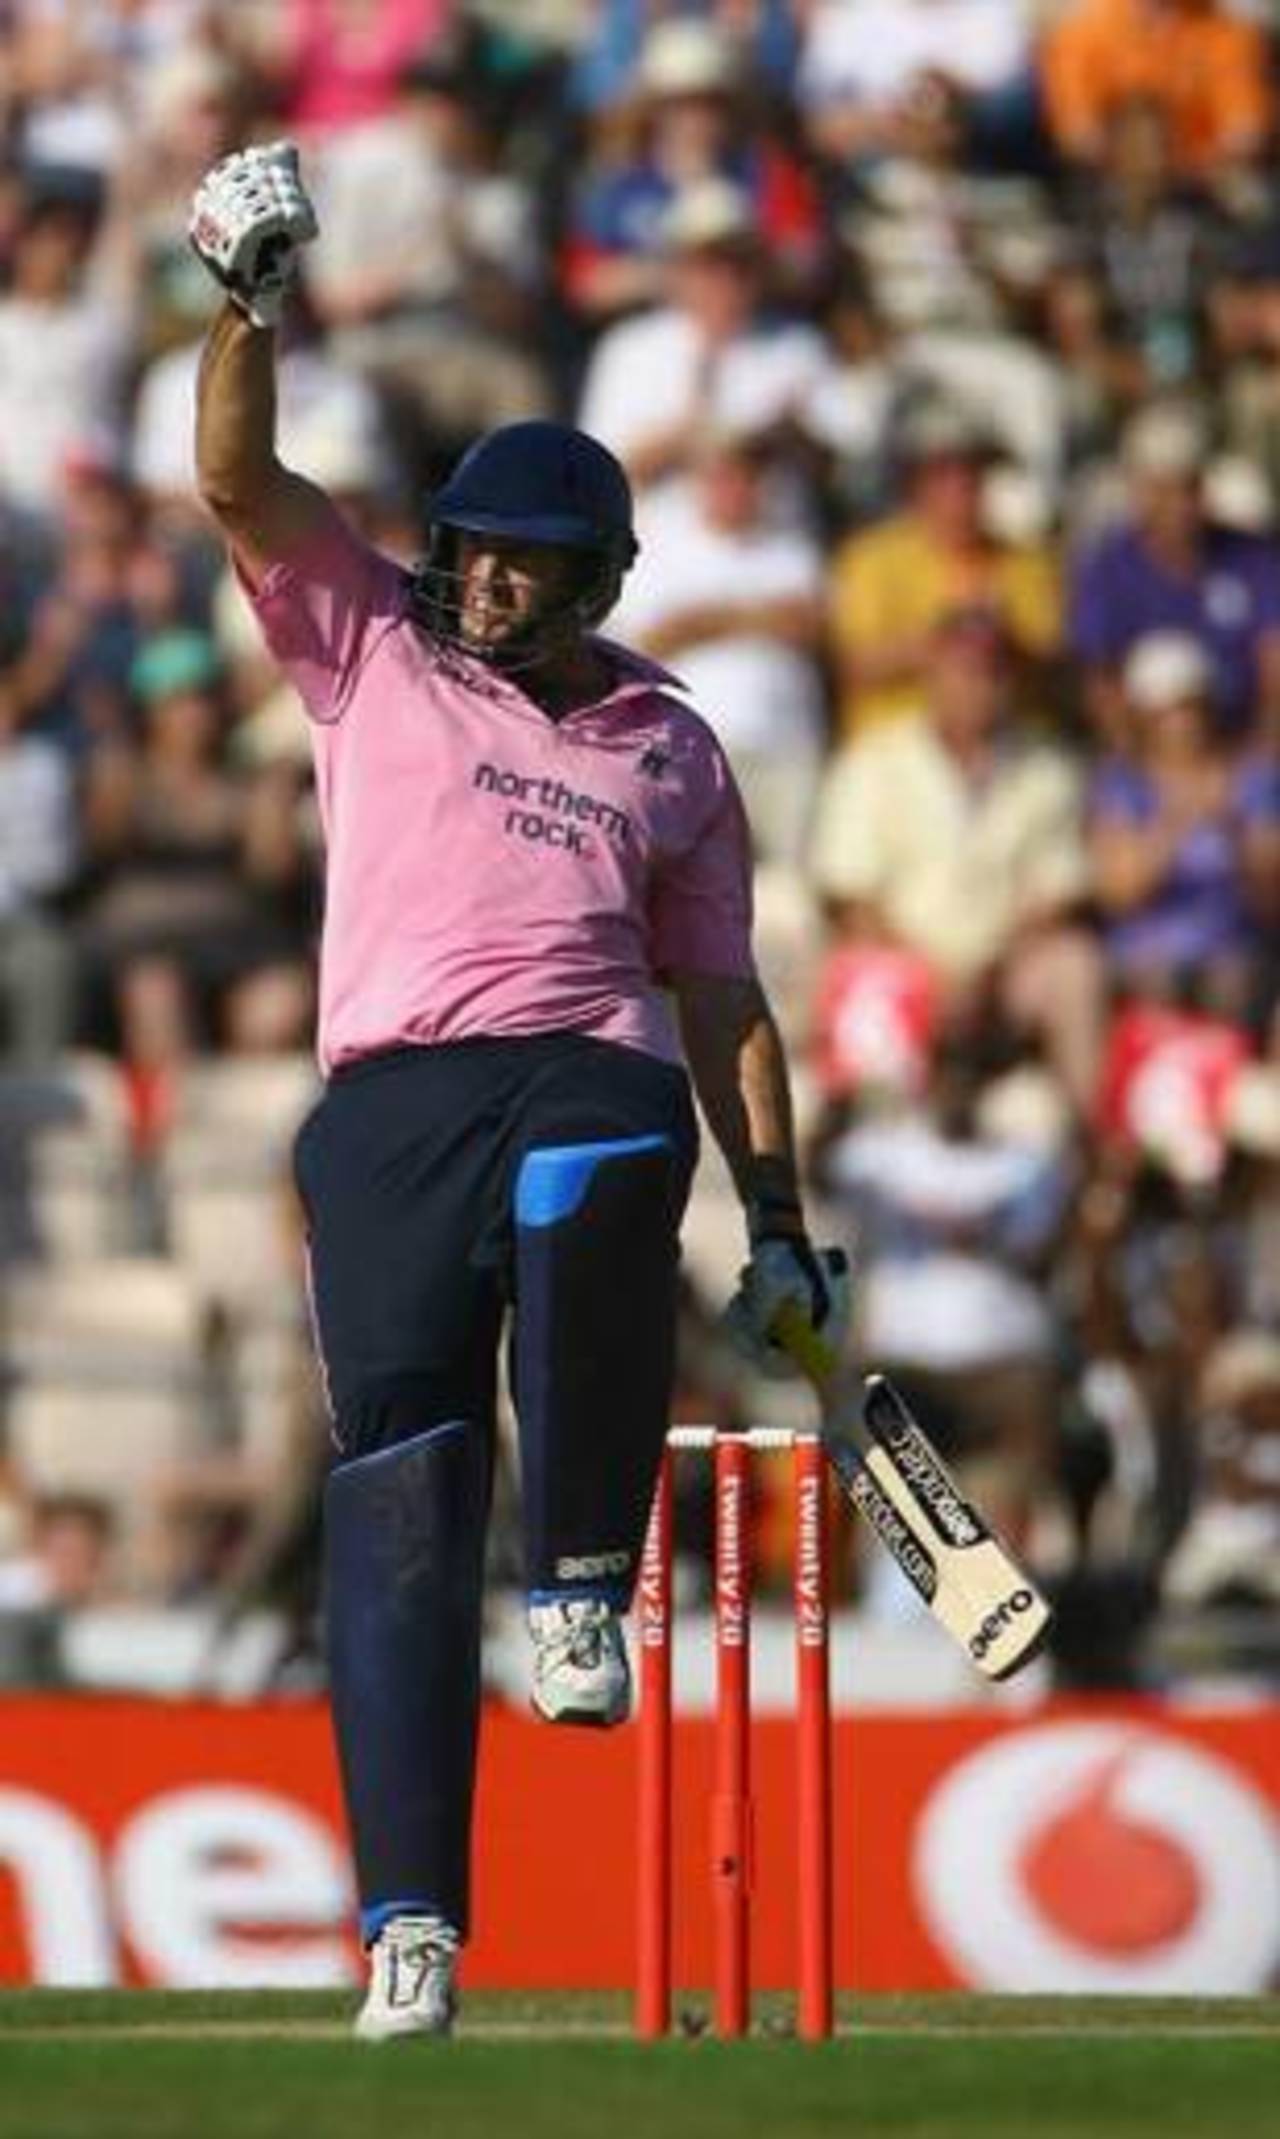 Tyron Henderson celebrates Middlesex's thumping victory, Durham v Middlesex, 2nd Twenty20 semi-final, The Rose Bowl, July 26, 2008